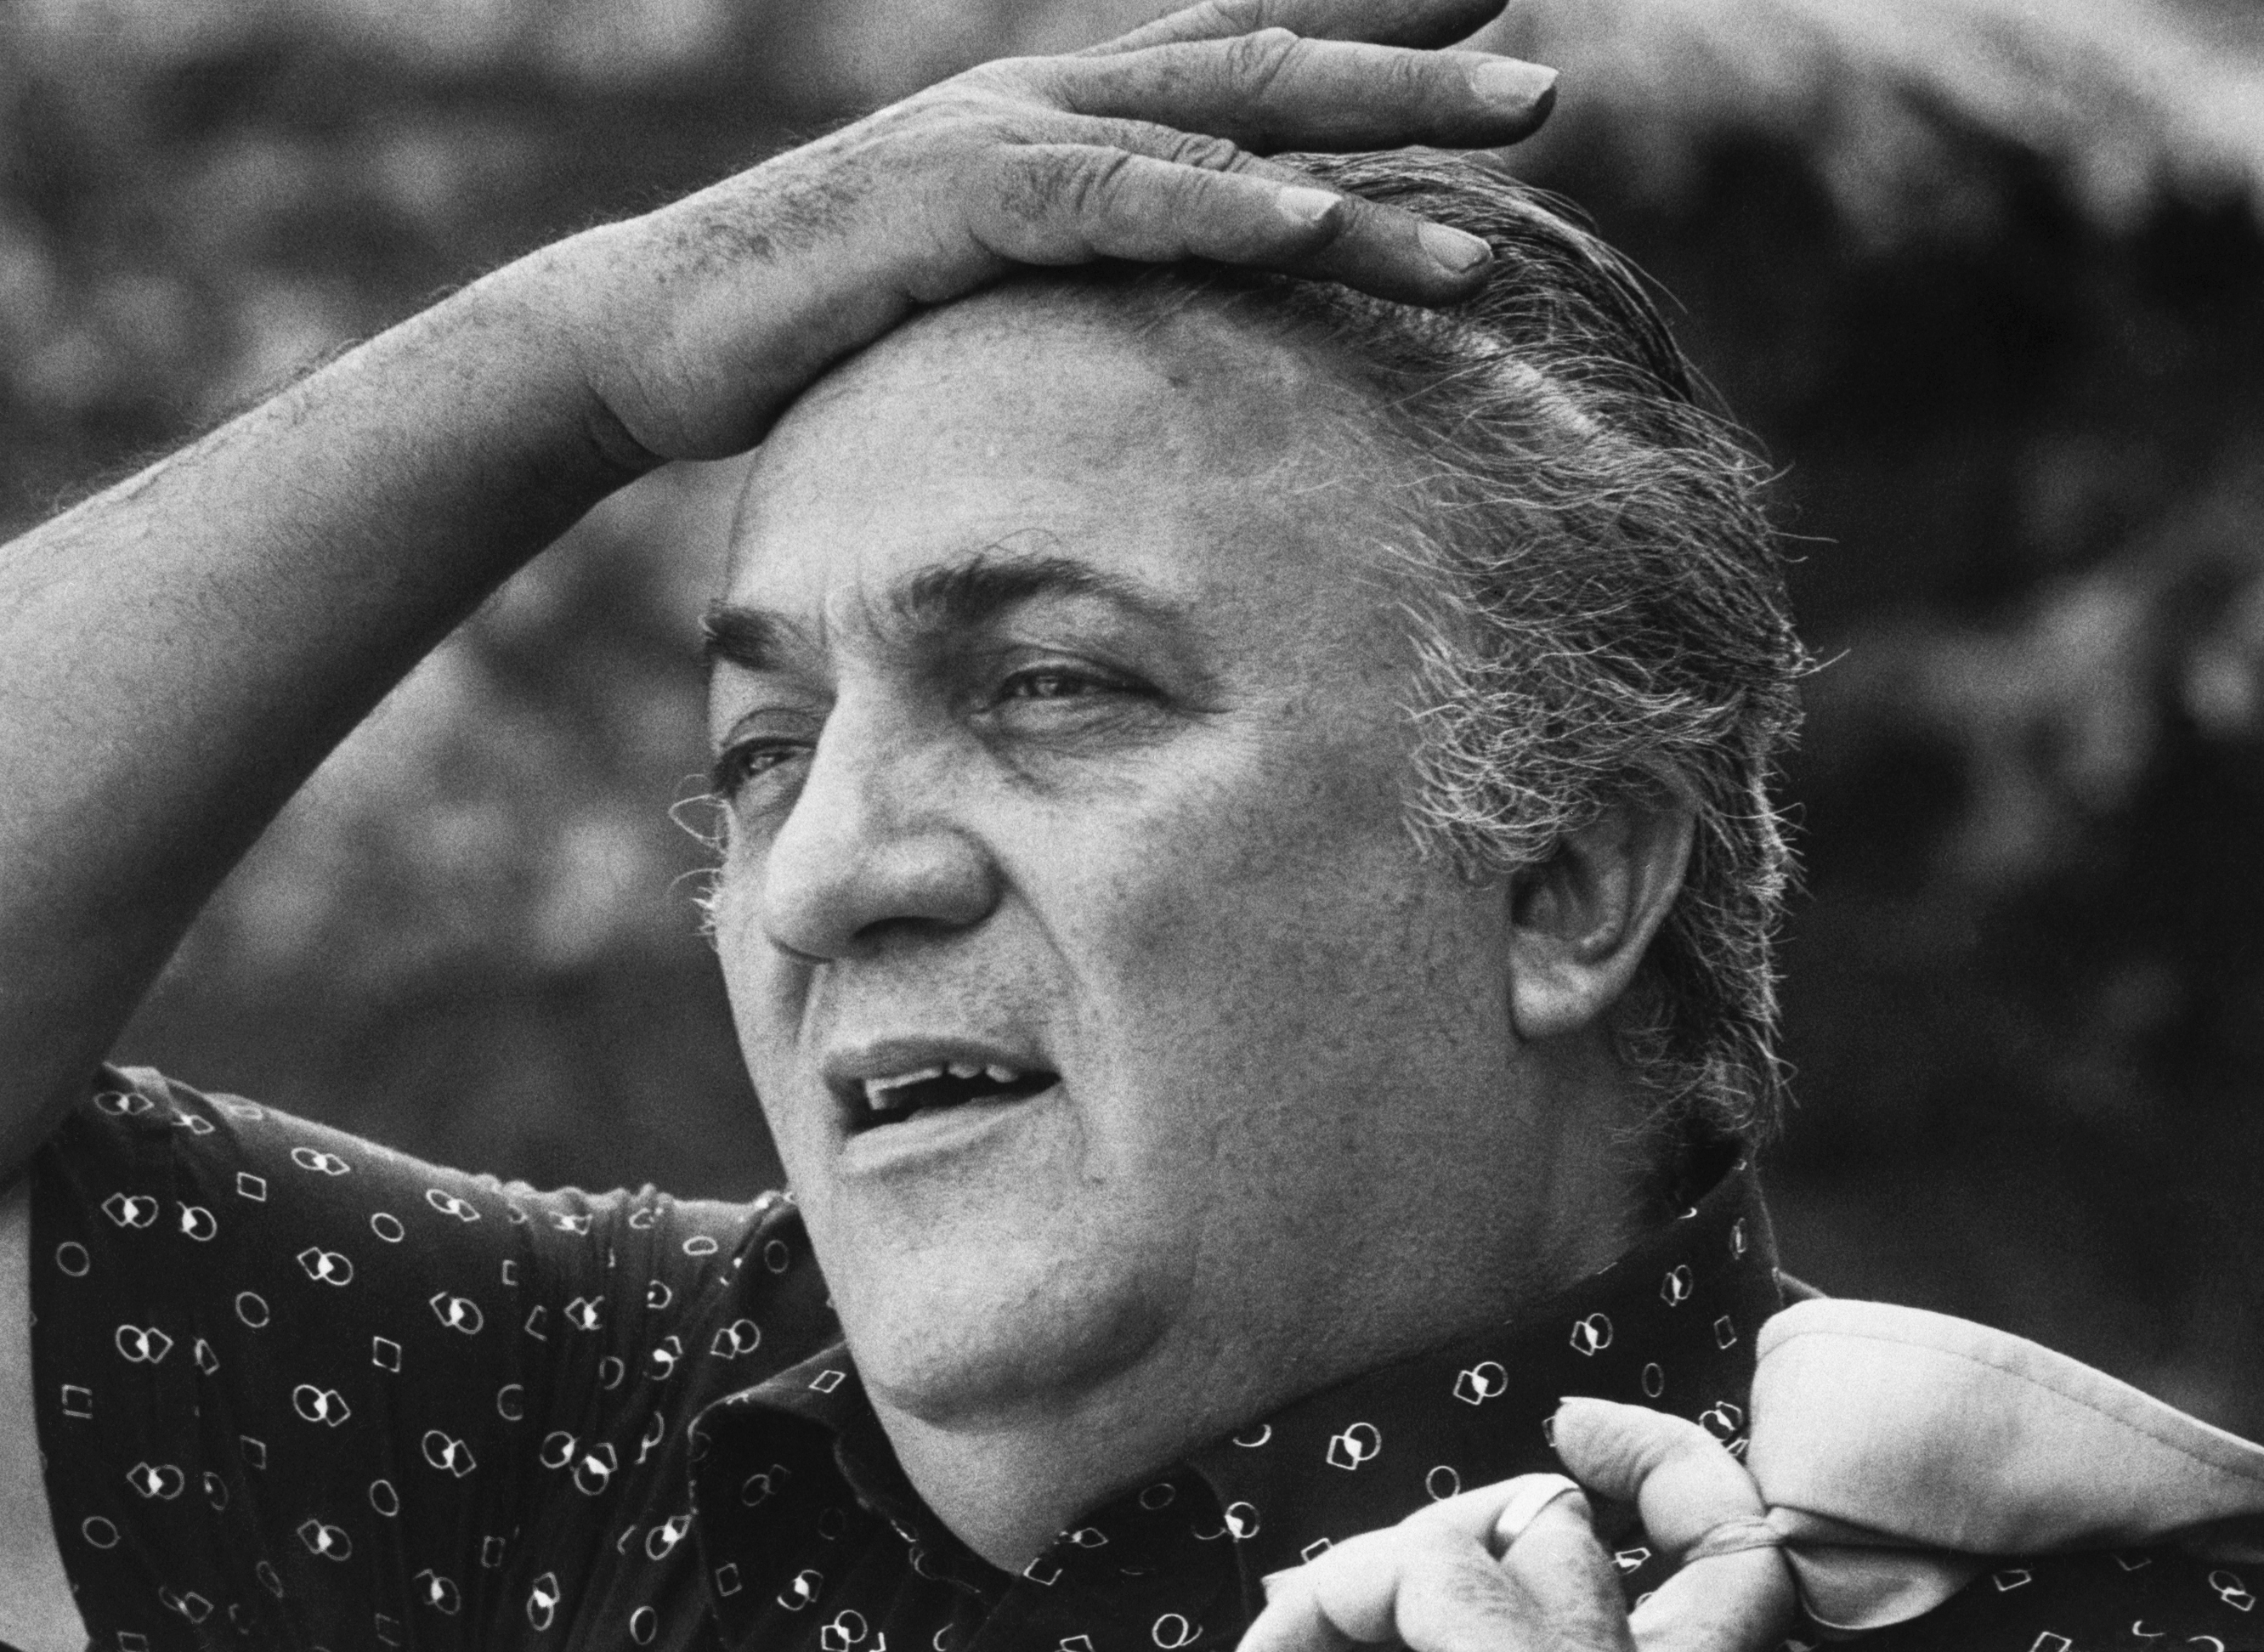 Federico Fellini with his hand on his head